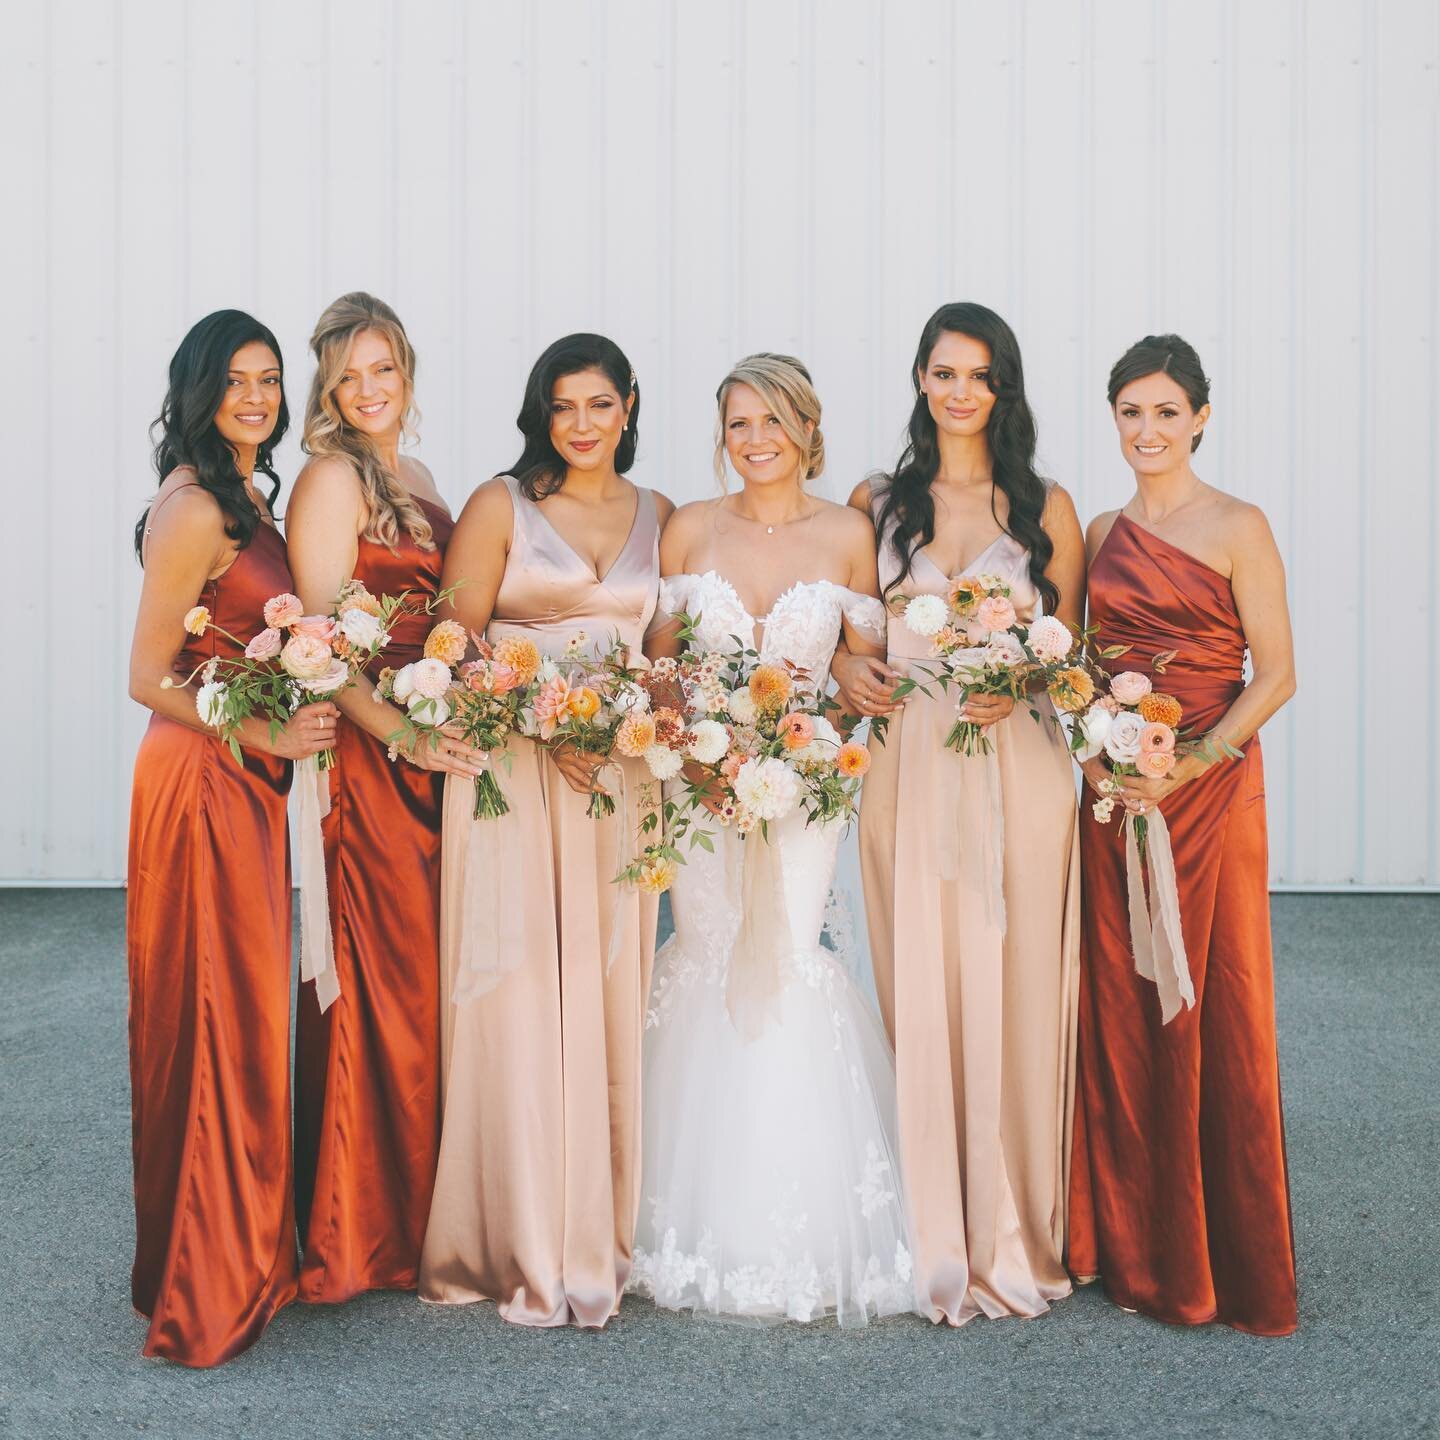 Cinnamon and champagne bridesmaid dresses paired with various shades of flowers ranging from peach to blush to burnt orange.  We love colour blending. 

#justynafloral #justynaflowers #flowers #floral #floraldesign #vancouverwedding #wedding #cinnamo